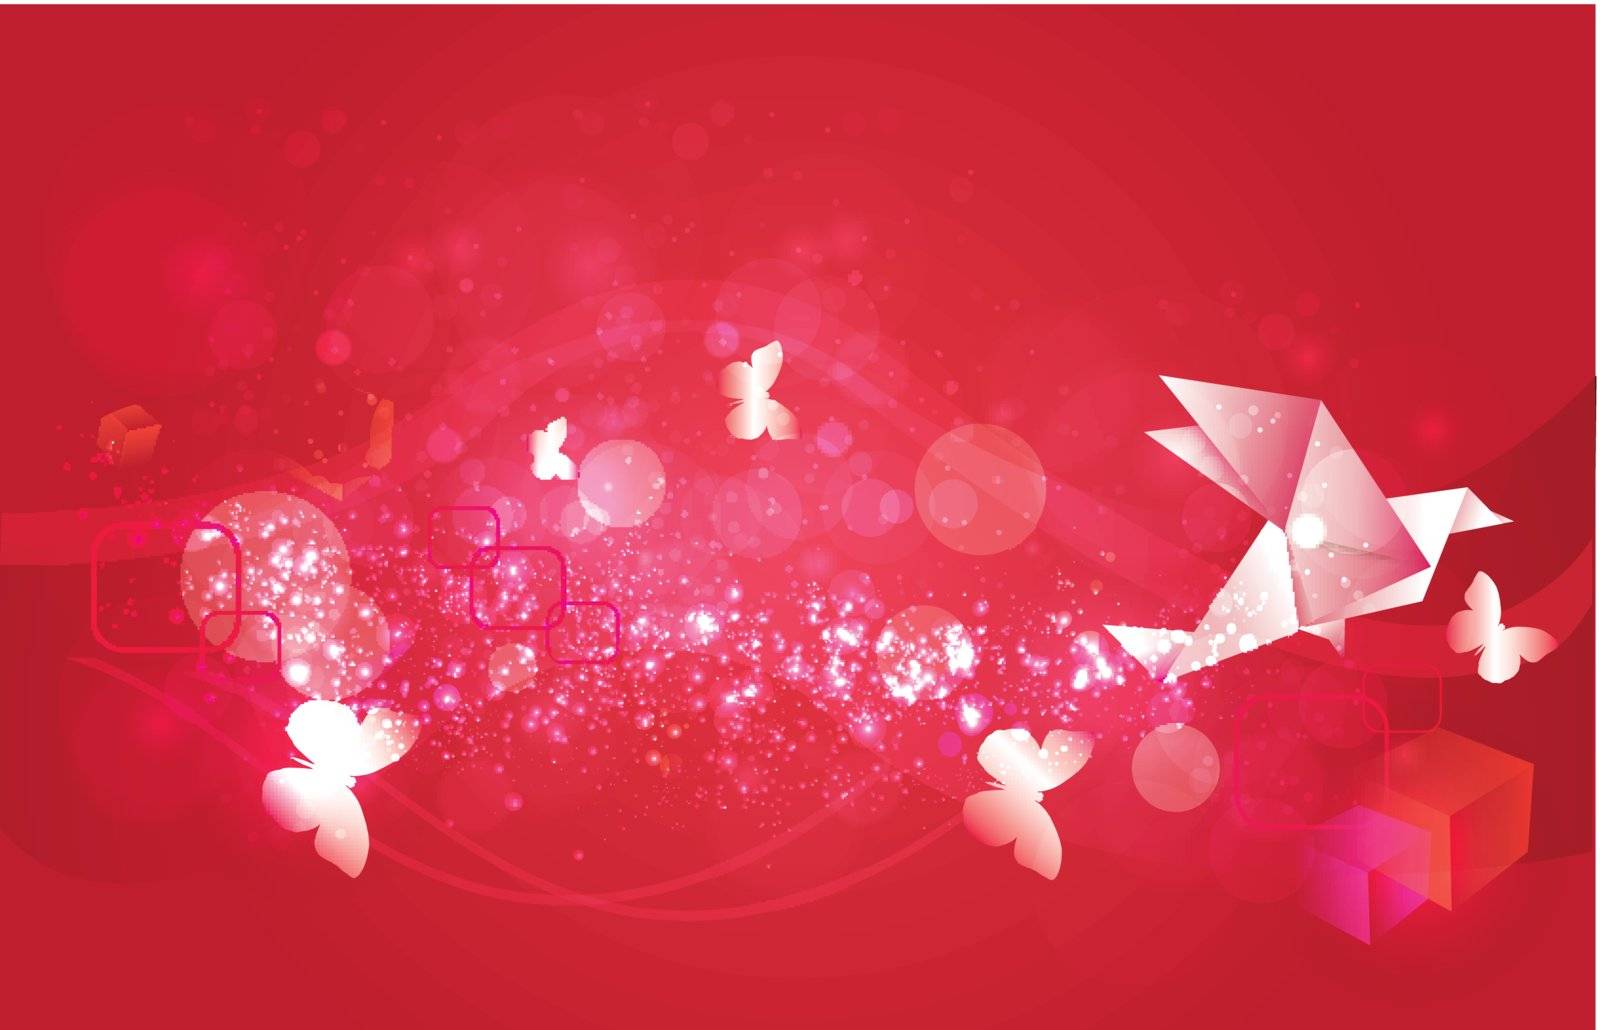 Origami Background(red) by Kireeva